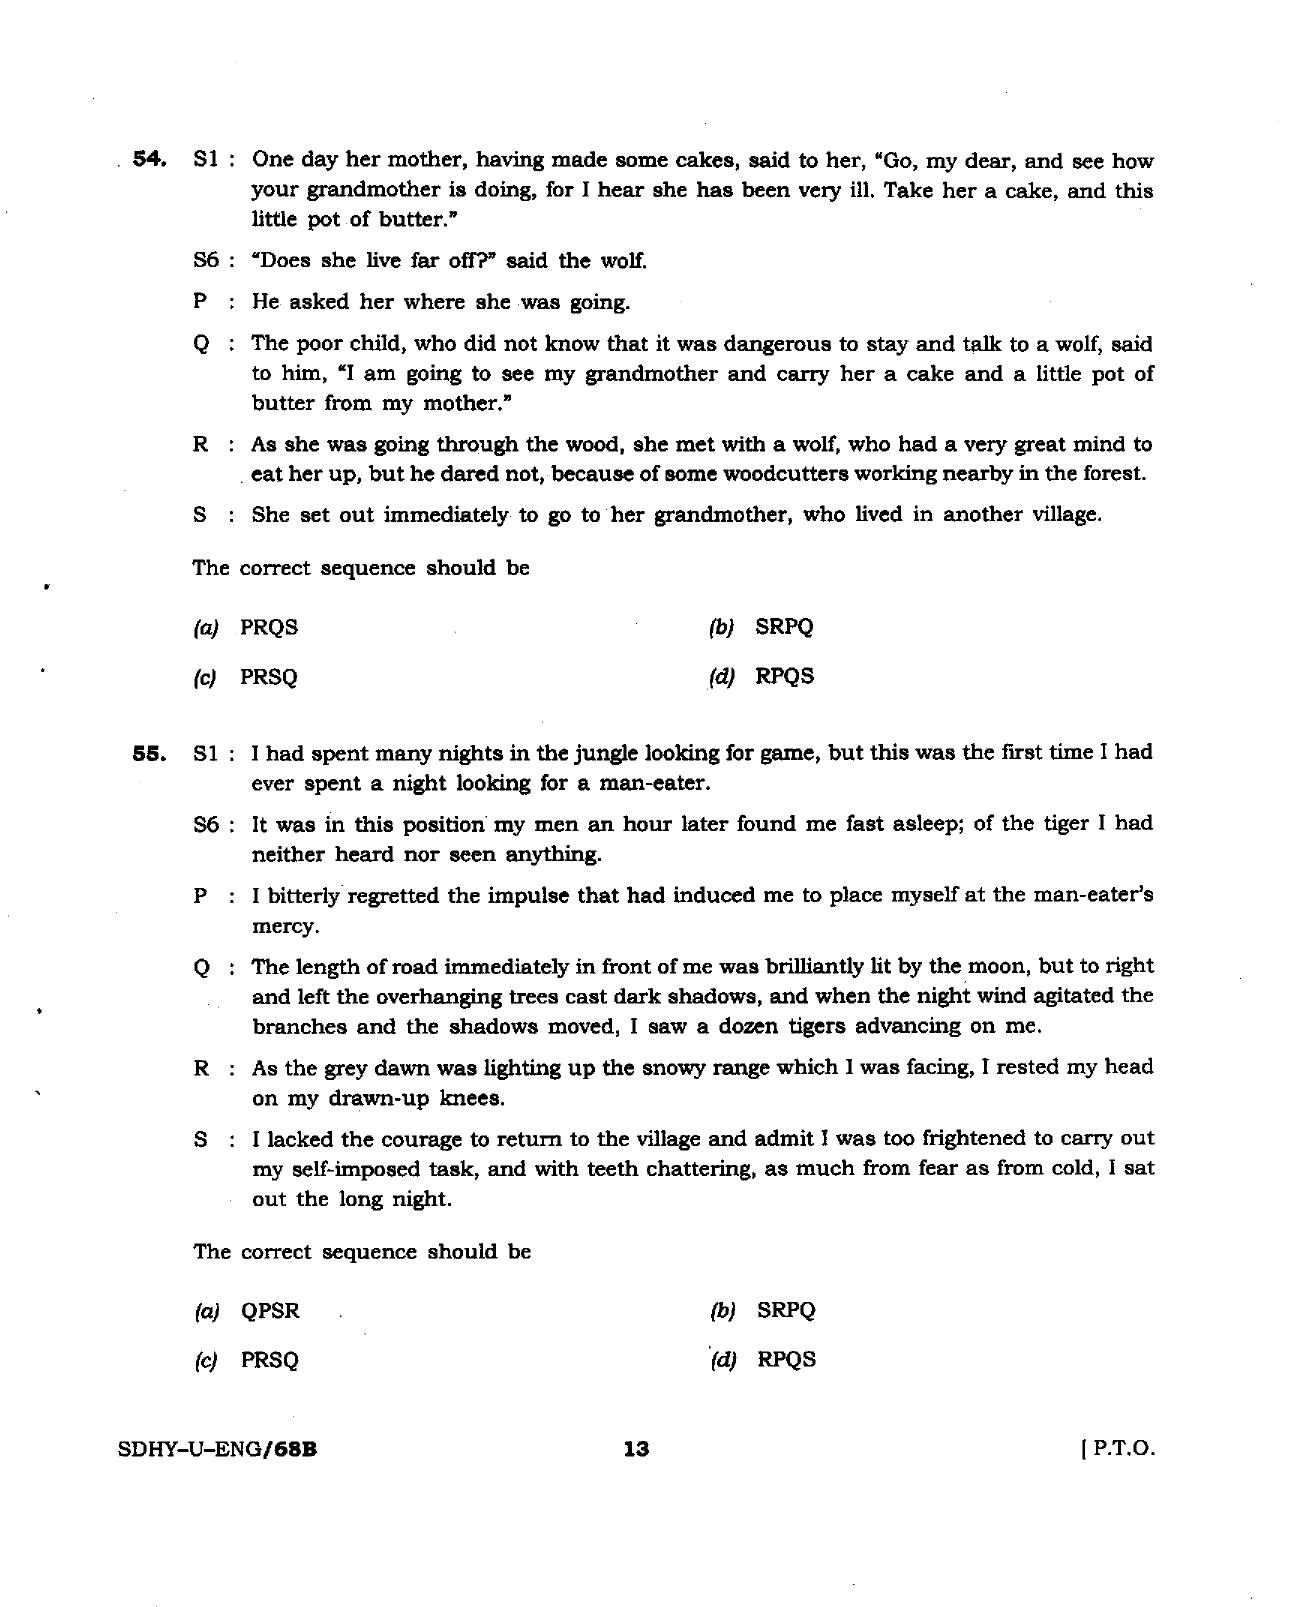 Patna High Court District Judge Previous Question Papers PDF for the English Language - Page 13